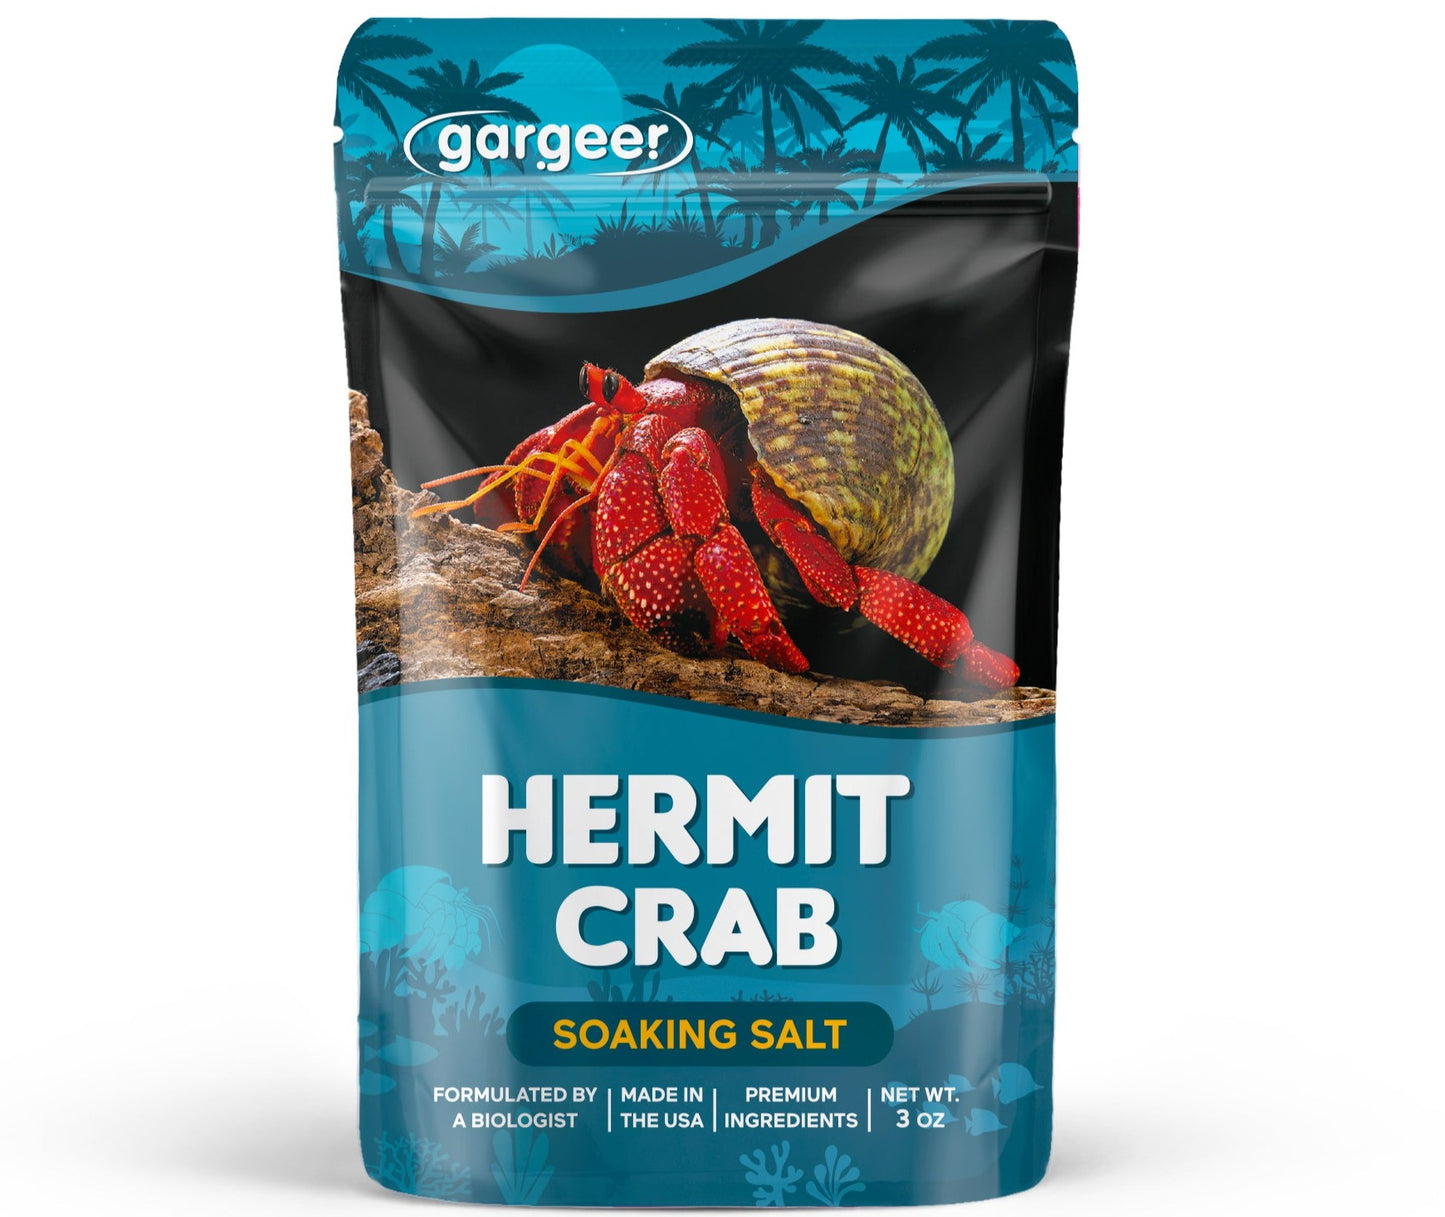 Gargeer Hermit Crab Soaking Salt, Ocean-Like Environment, Includes Calcium and Trace Minerals, No additives or Harmful Ingredients. for Optimal Health and Well-Being